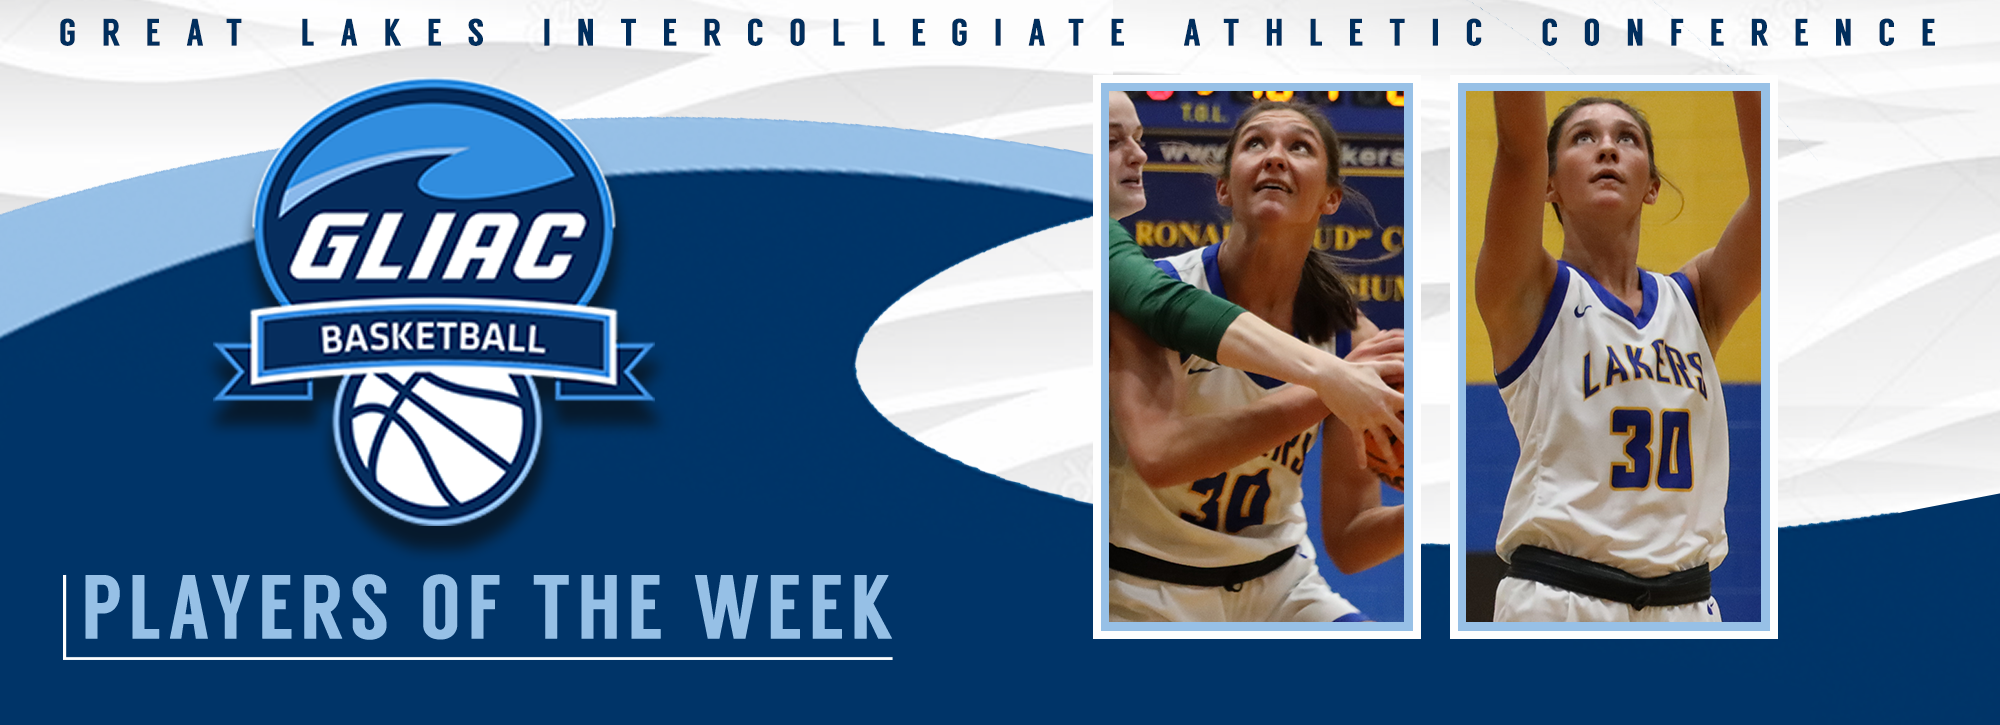 LSSU's Bradford recognized with GLIAC women's basketball player of the week honors